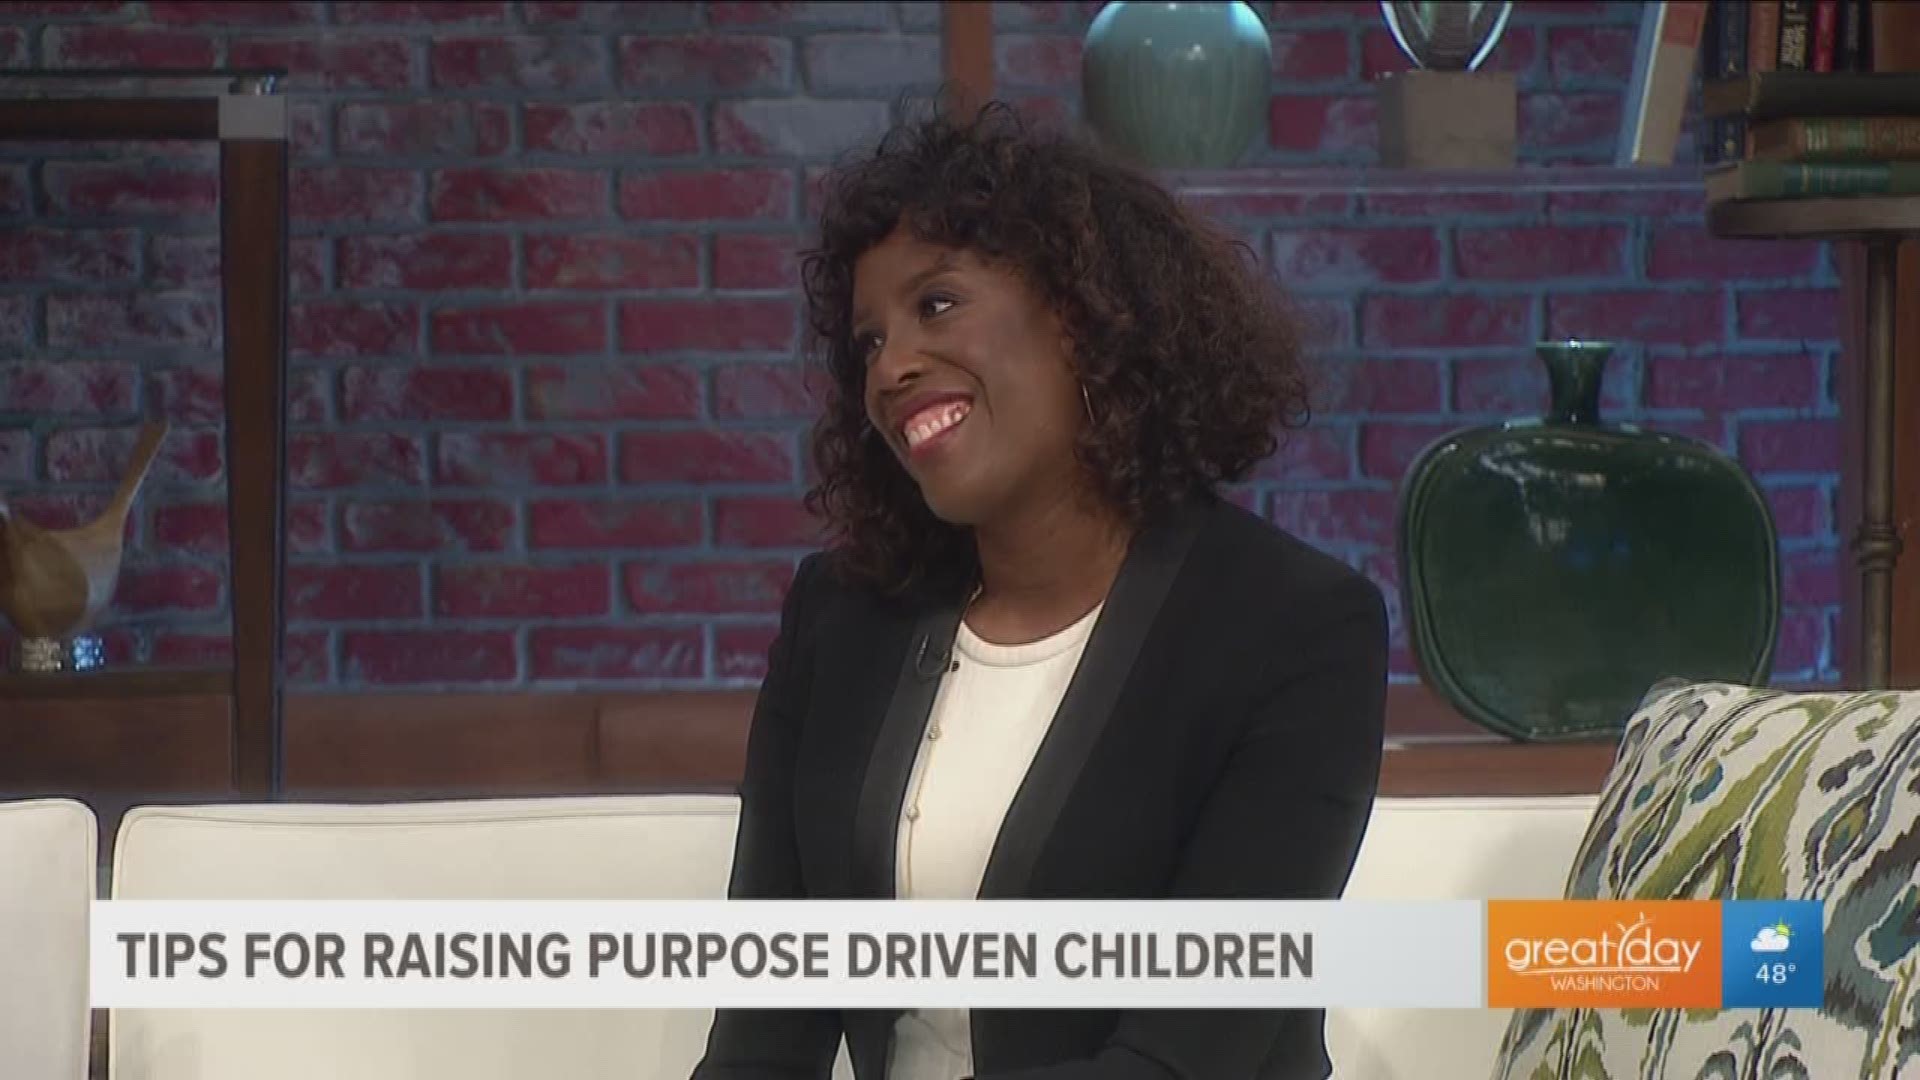 Petal Modeste, parenting expert and host of the Parenting for the Future podcast provides her top tips on how to raise purpose-driven children.